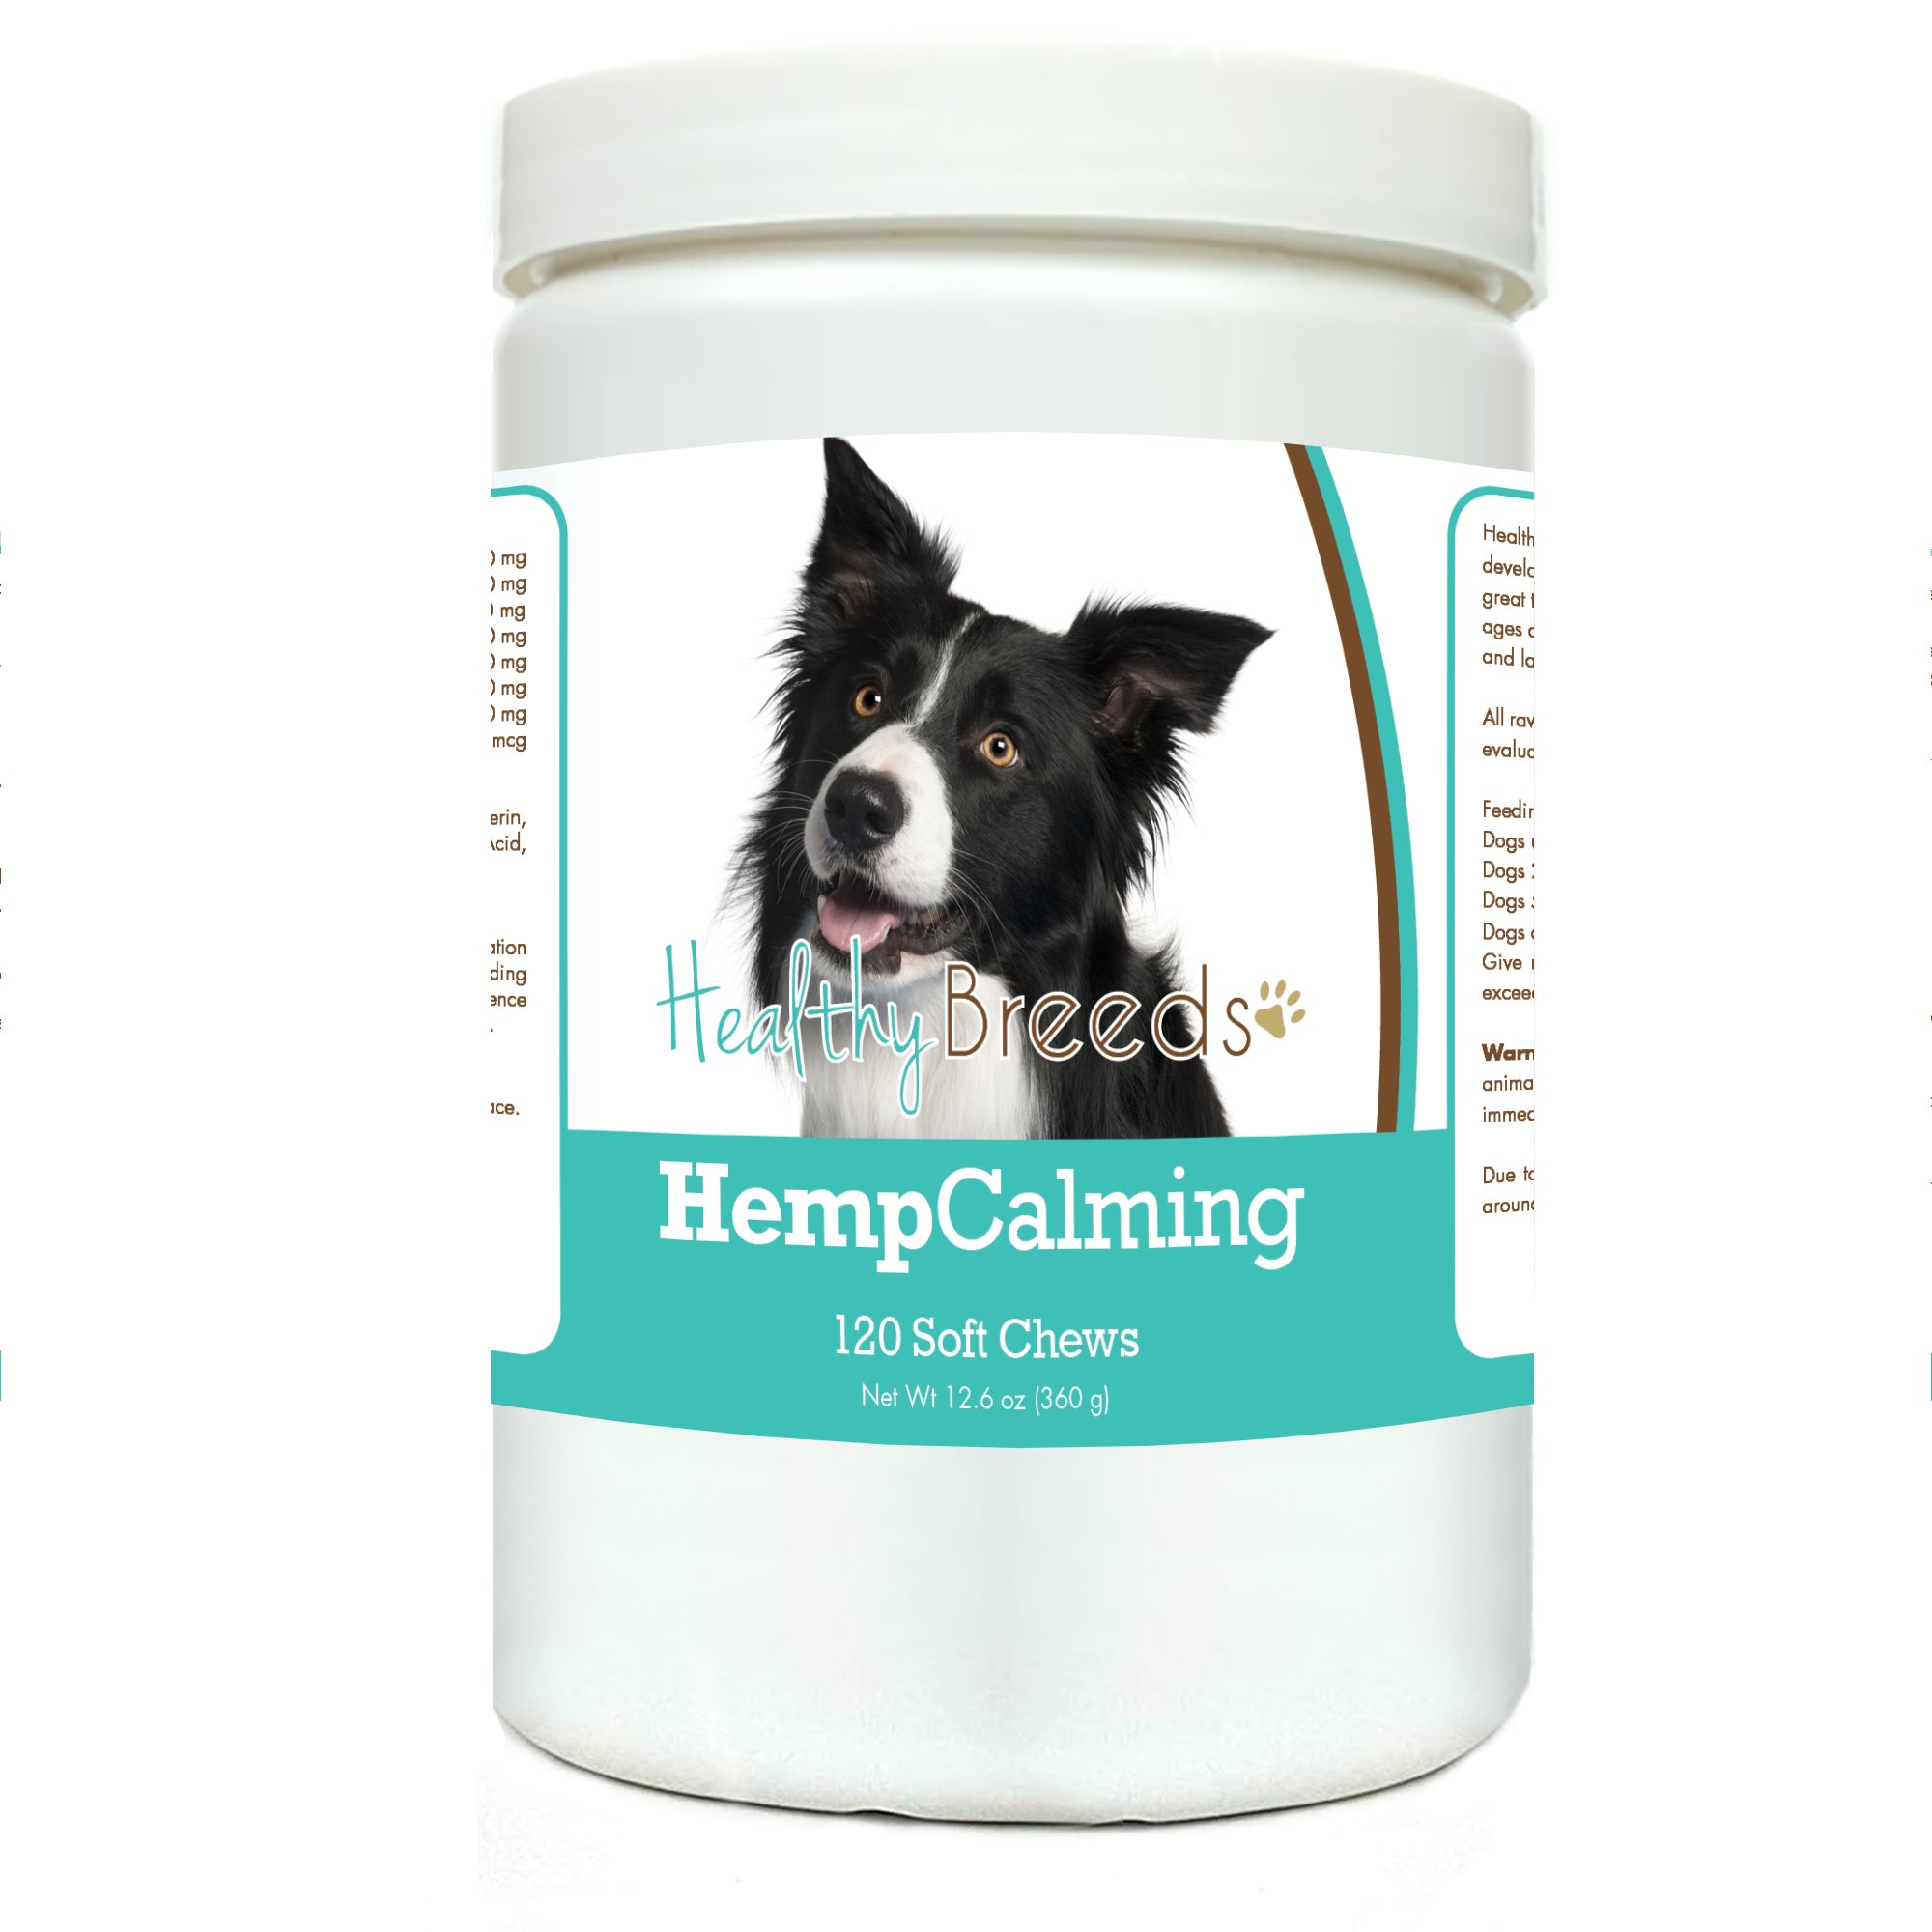 Healthy Breeds Border Collie Hemp Calming Soft Chews for Dogs 120 Count